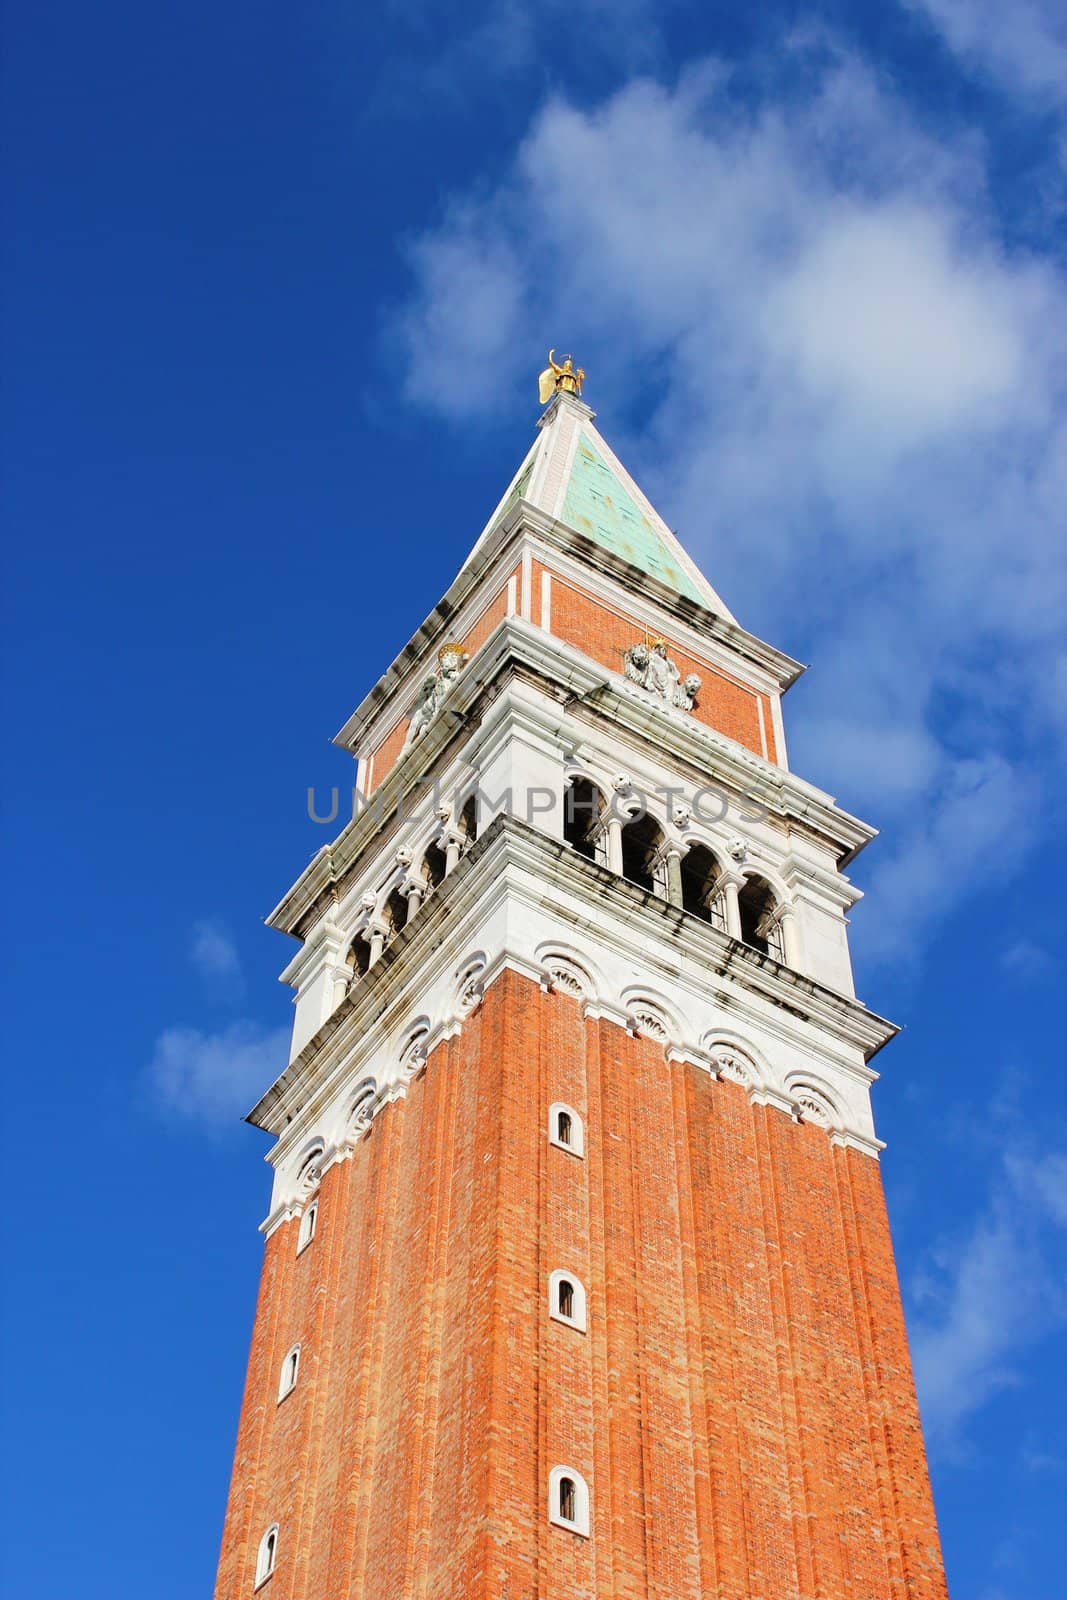 Tower in Venice by Metanna